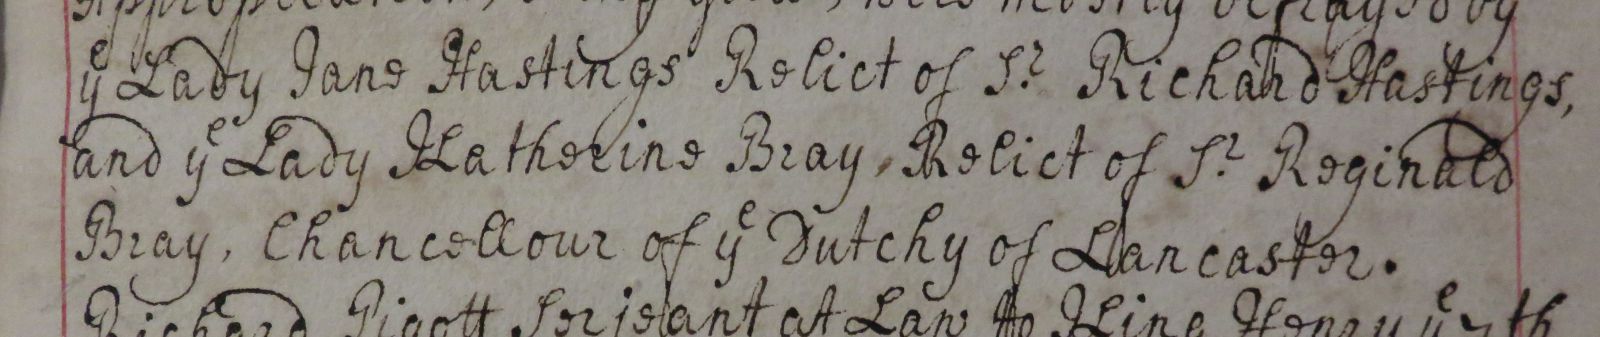 Extract from Commemoration of Benefactors book listing Katharine Bray. This volume from the College Archives contains detailed lists of the donations and bequests made by benefactors to the College between c. 1668 and 1825, including details of the bequest made by Katherine Bray.